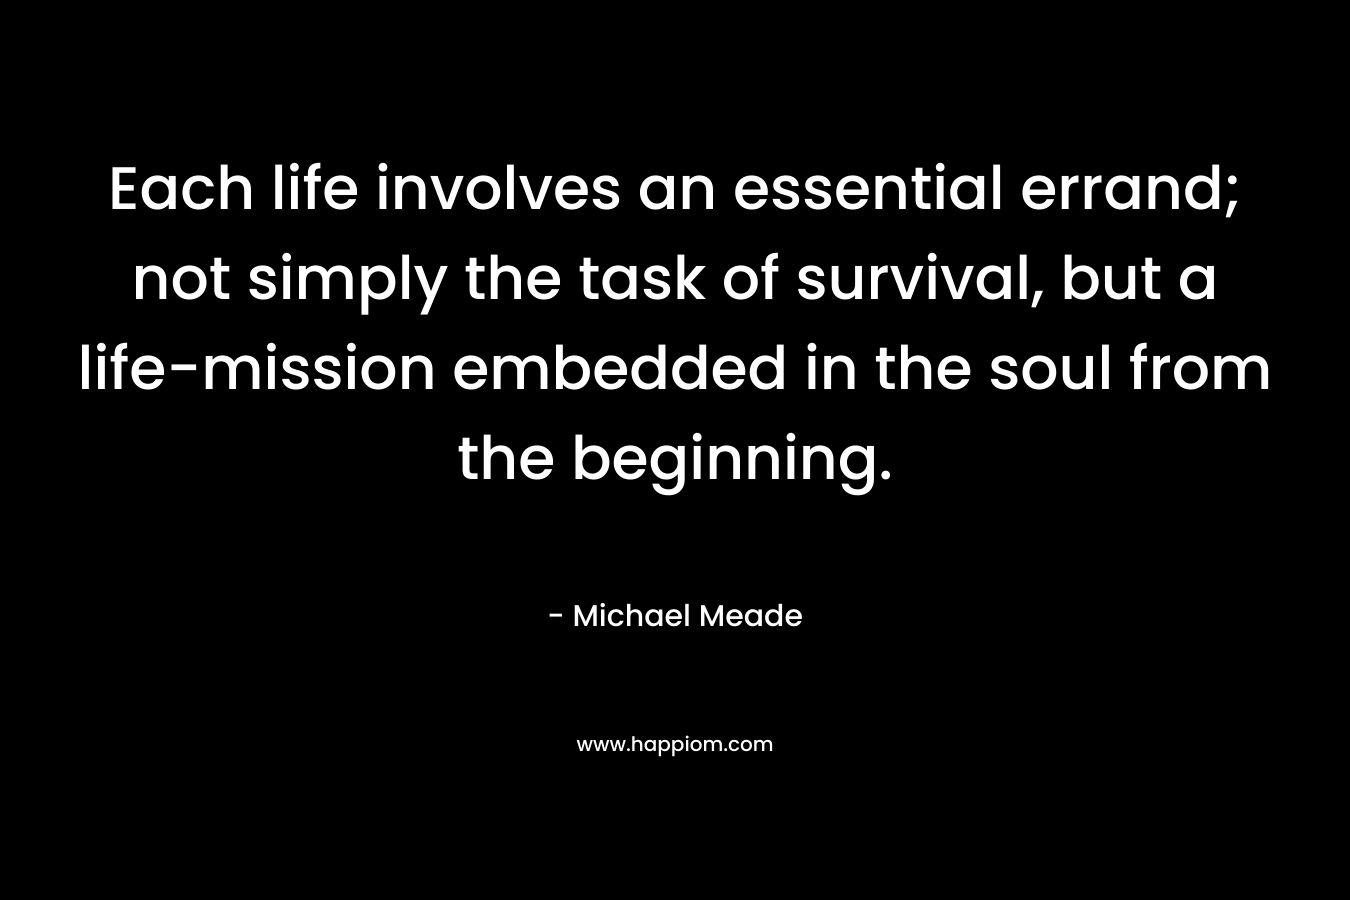 Each life involves an essential errand; not simply the task of survival, but a life-mission embedded in the soul from the beginning. – Michael Meade